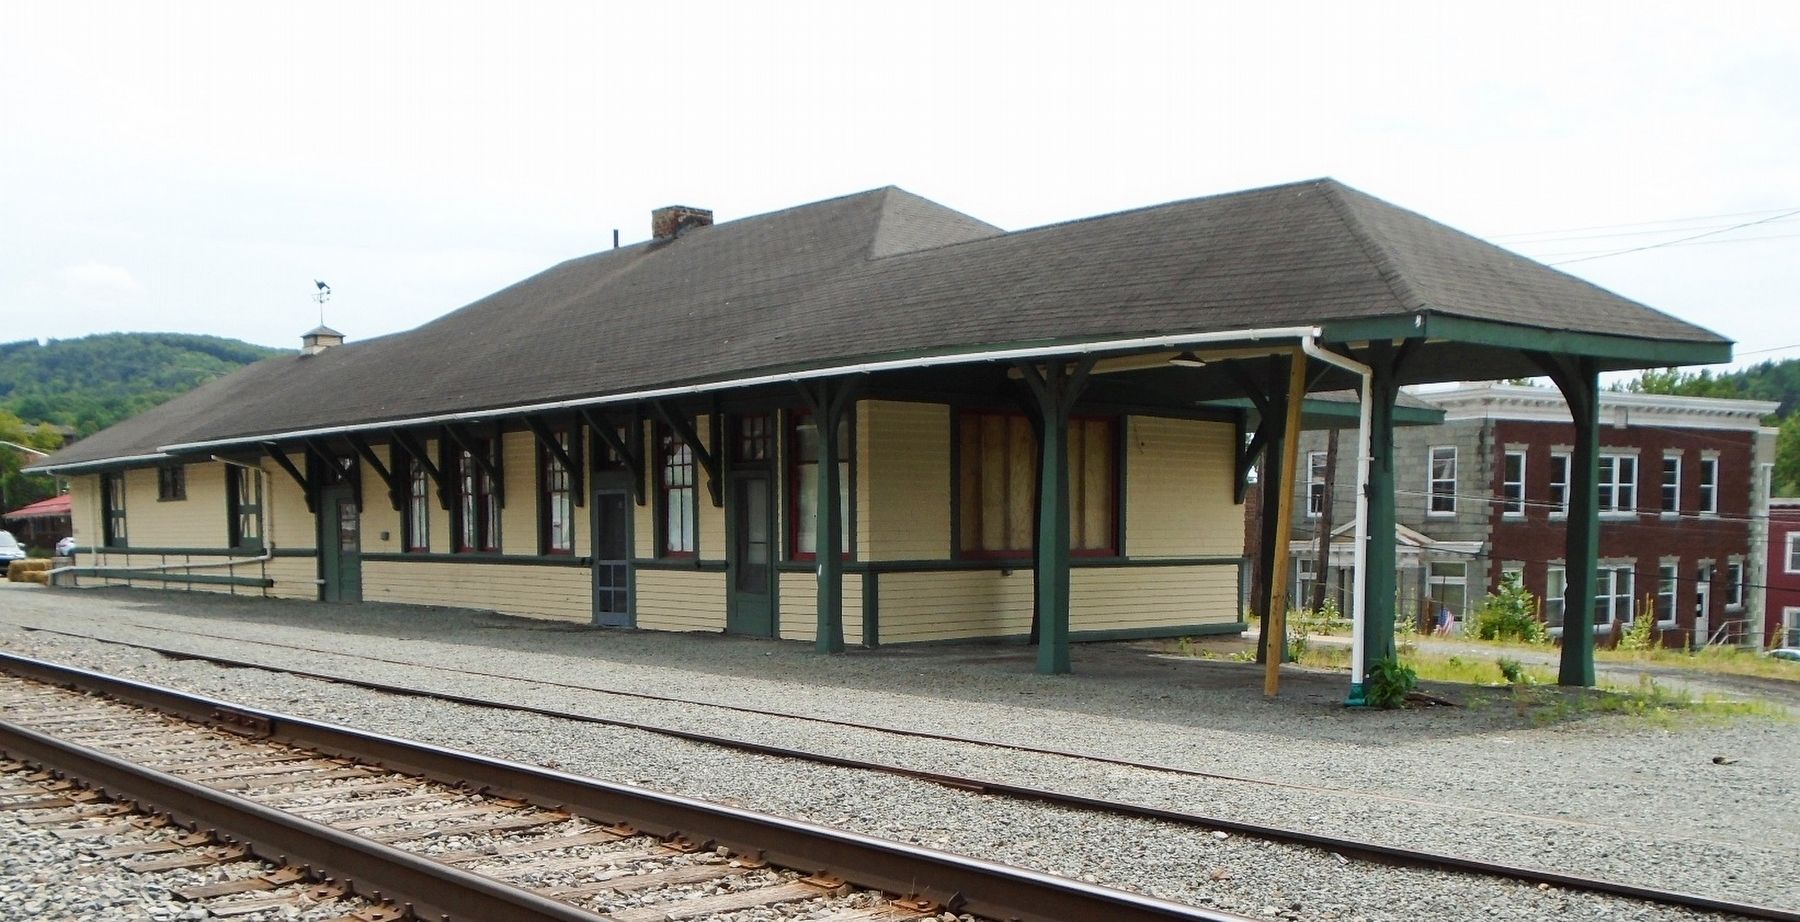 Erie Railroad Passenger Station (looking SE) image. Click for full size.